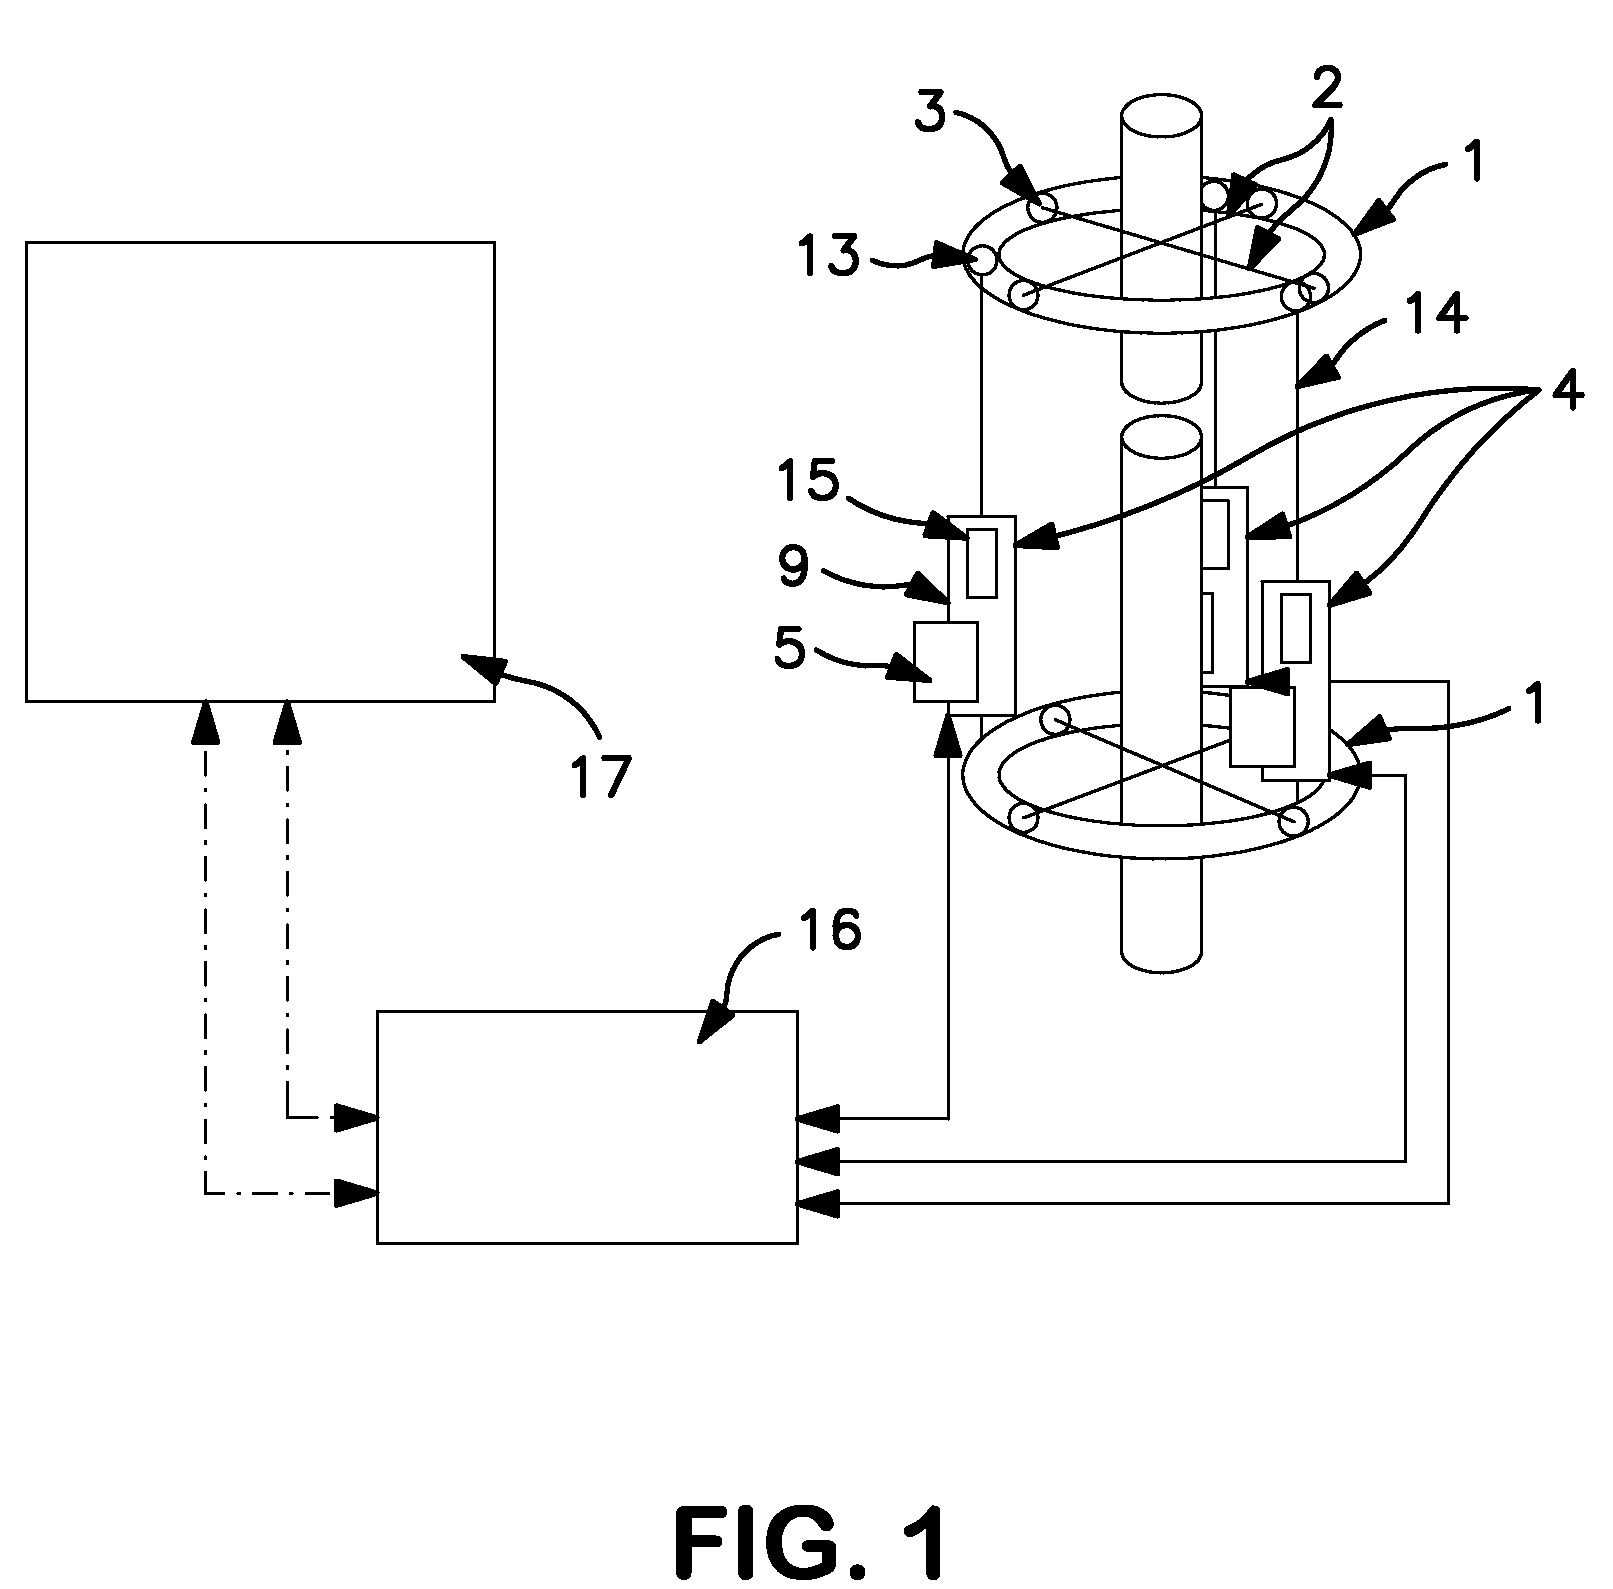 Computer-Aided System for Limb Lengthening